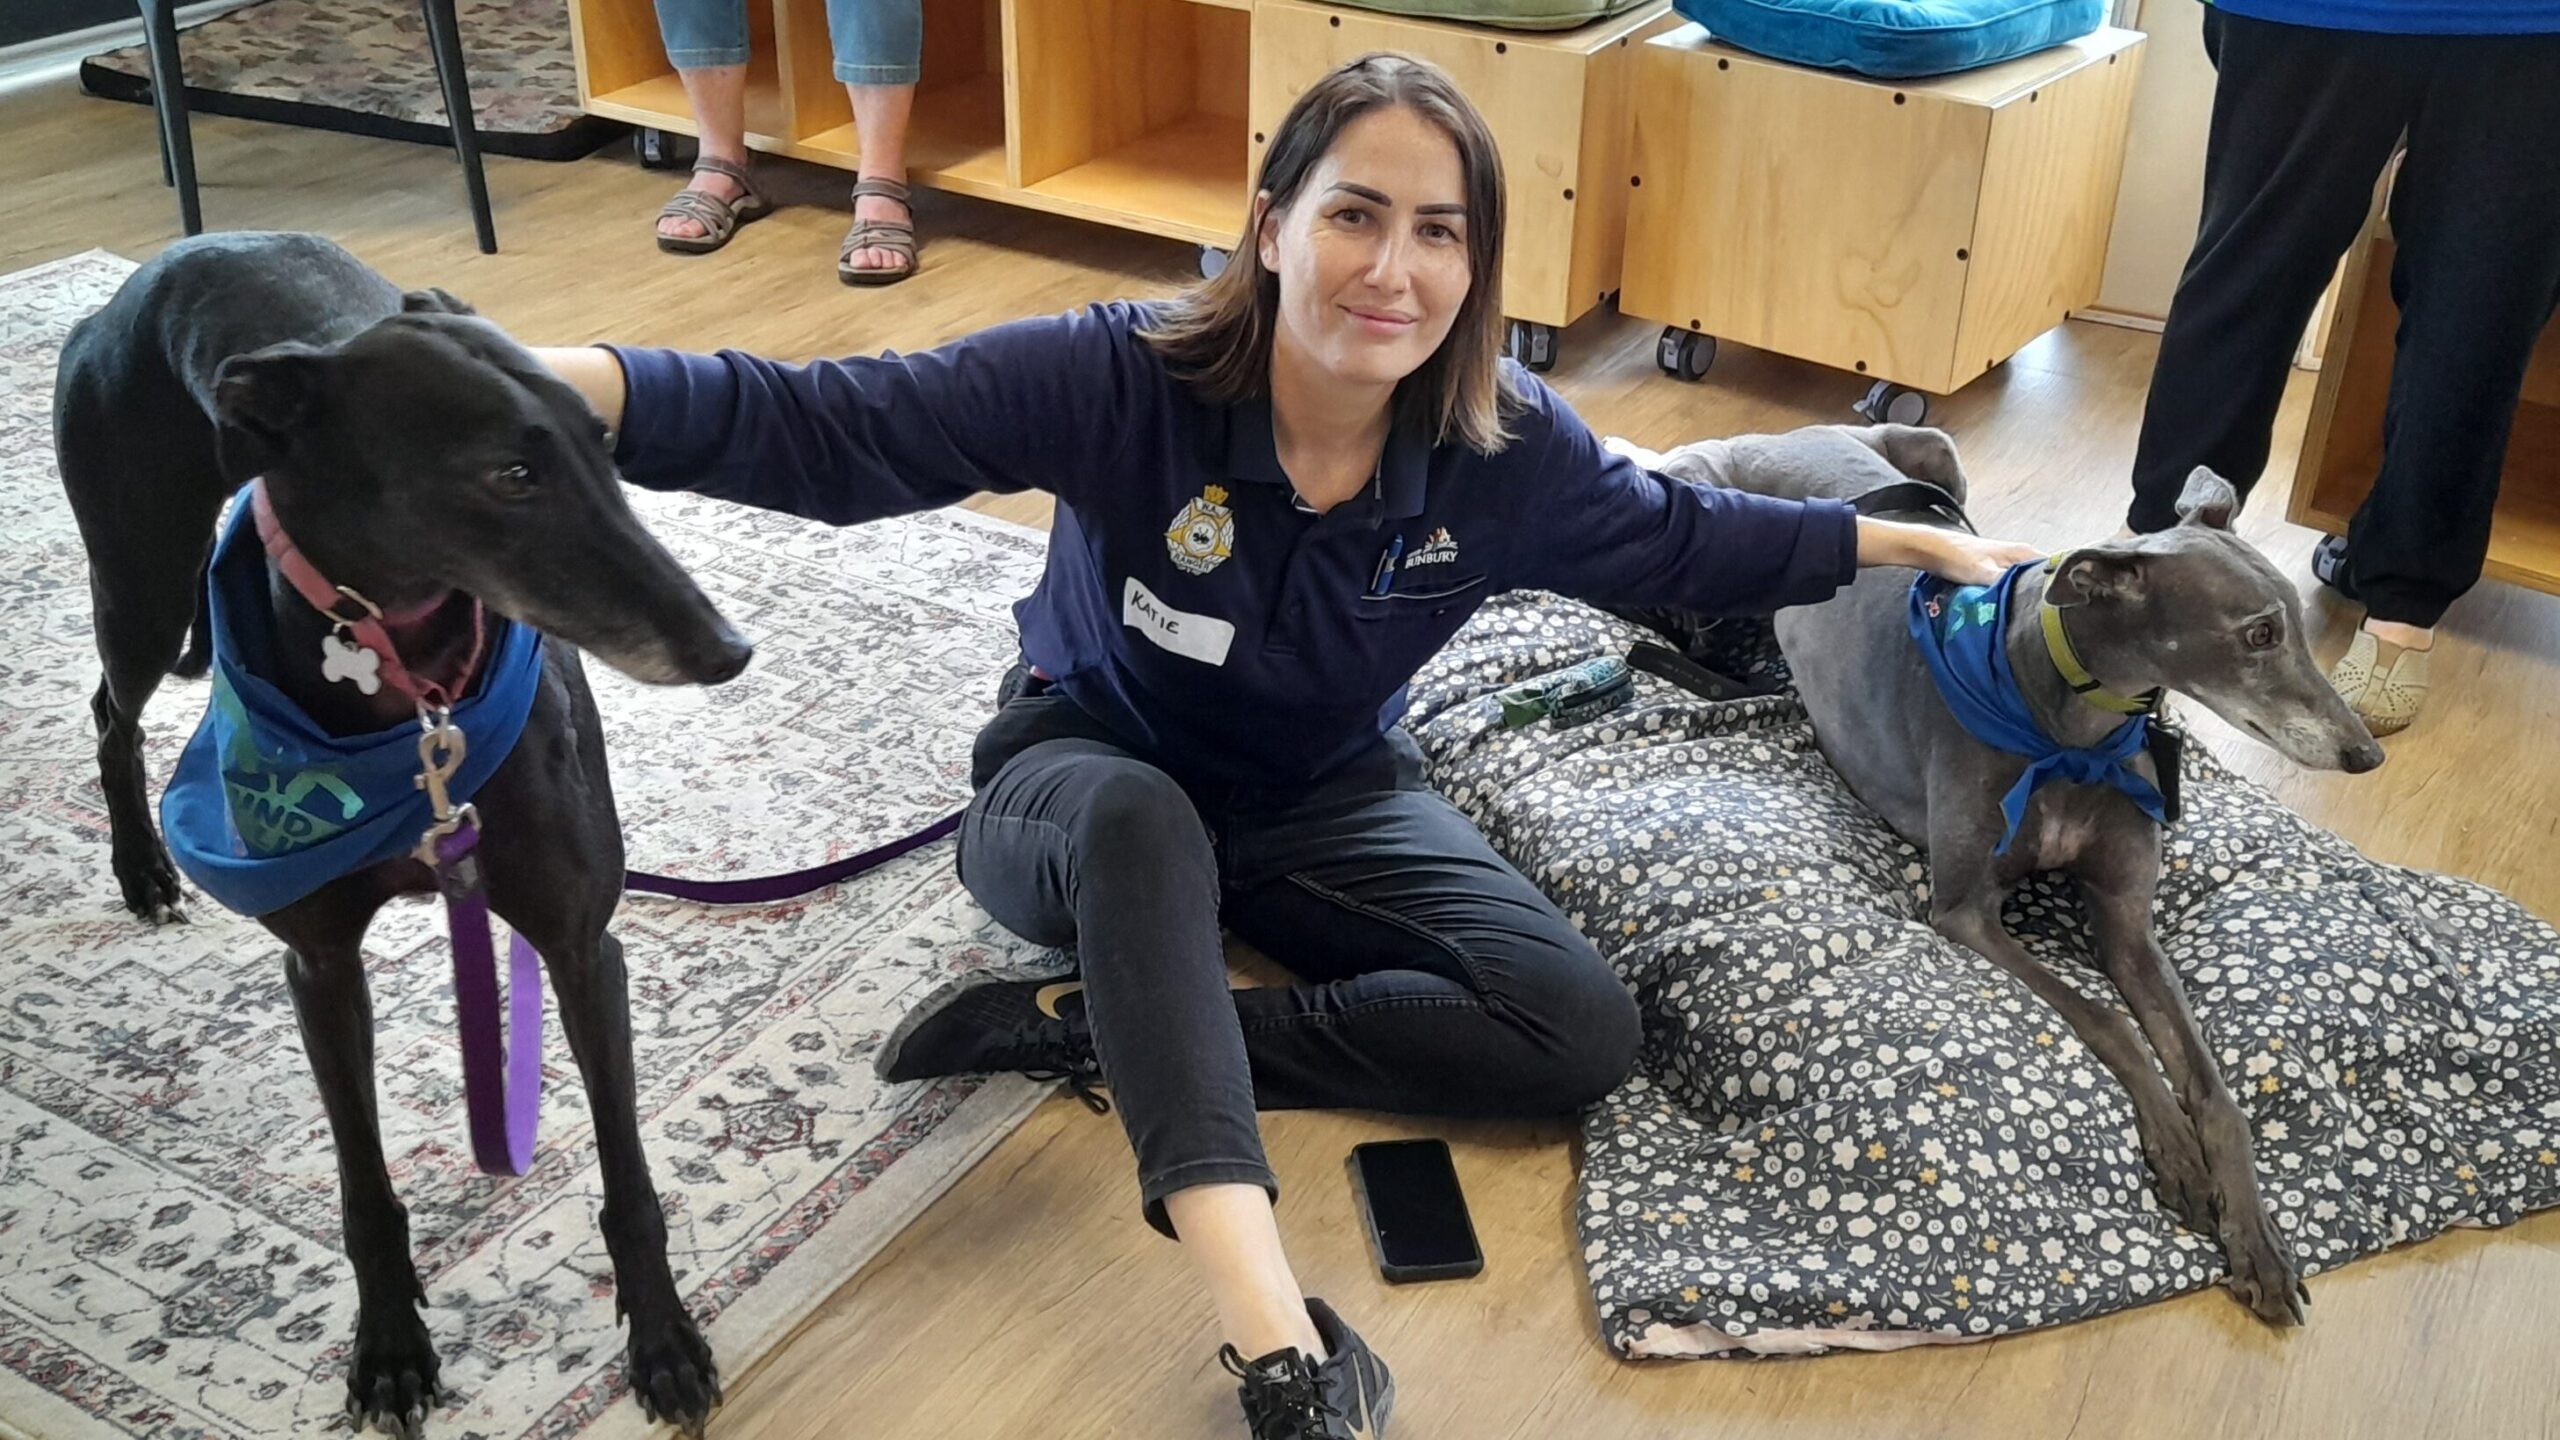 City of Bunbury ranger seated on hardwood floor with a black greyhound standing to the left of her on a rug and a grey greyhound sitting on a dog bed to her right. The ranger is wearing black jeans, navy blue top and she has brown hair.